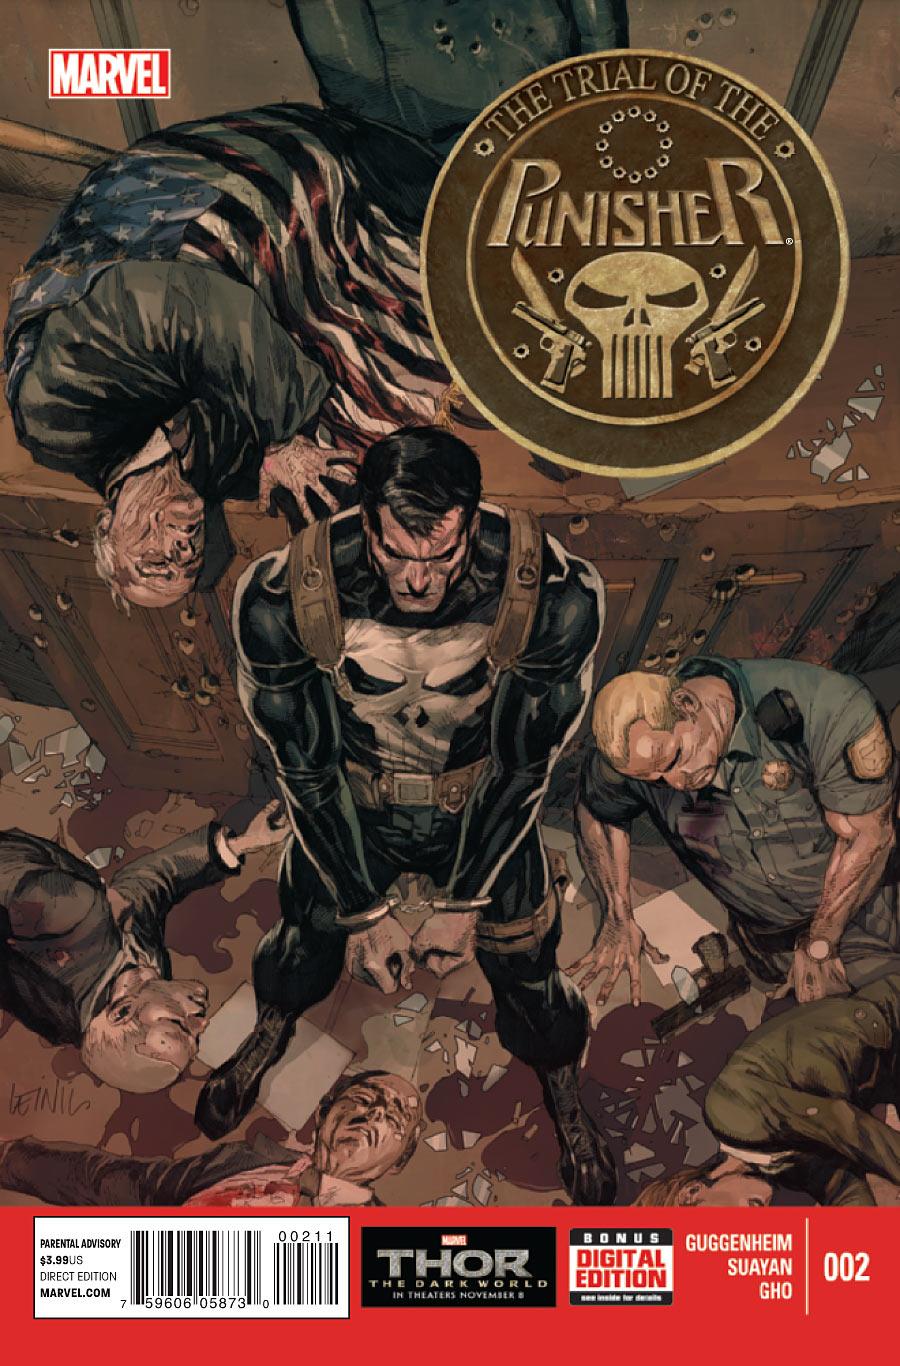 Punisher: Trial of the Punisher Vol. 1 #2